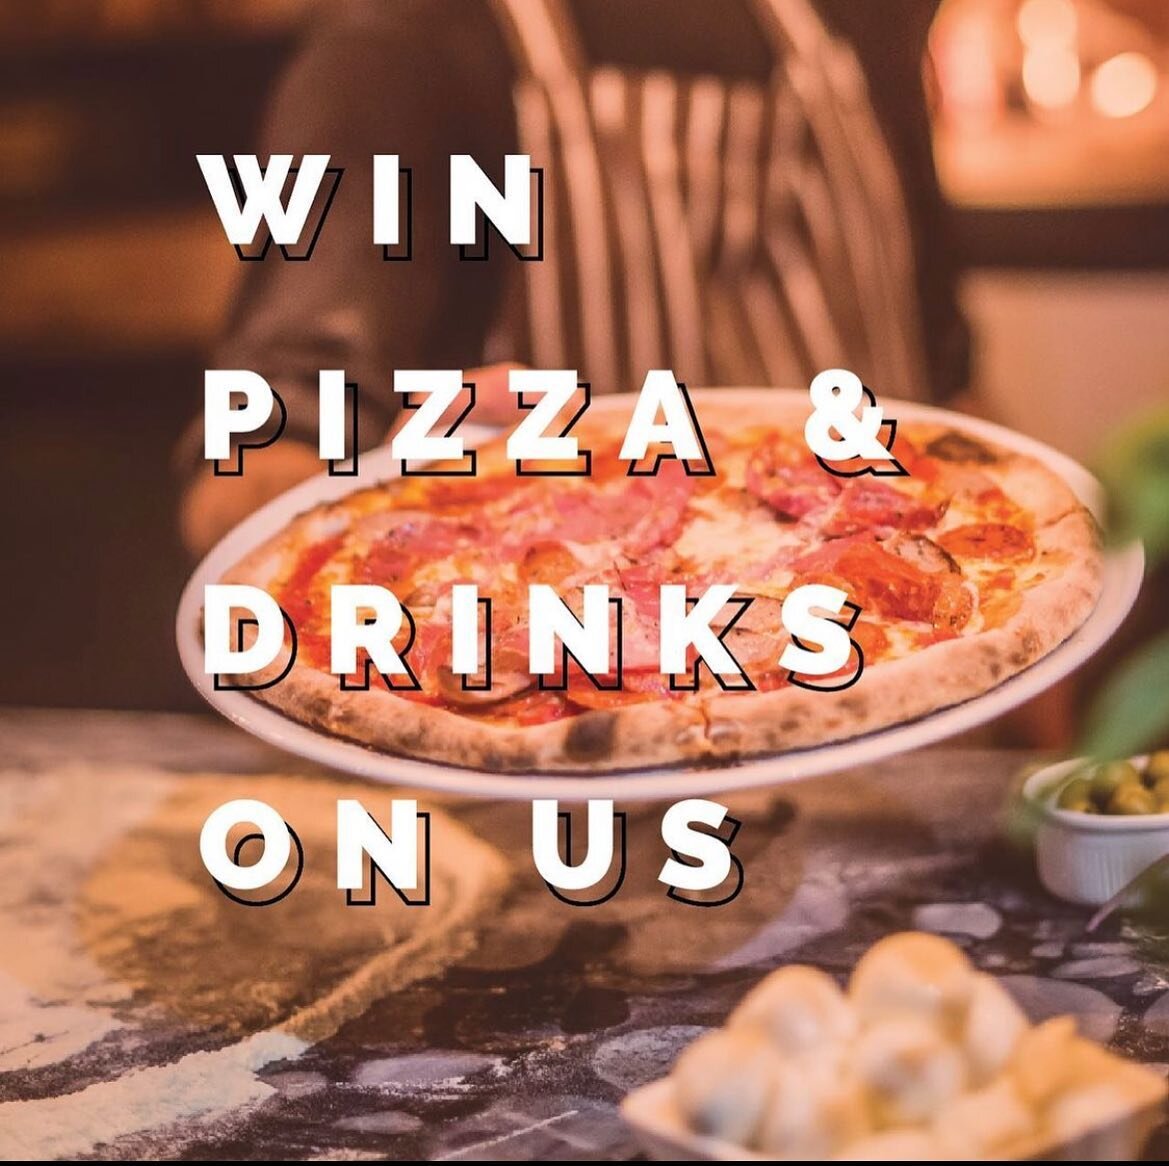 🍺 COMP CLOSED 🔥 WINNER ANNOUNCED SOON ☀️ 🍕 Keep it cool with a couple of bevvies and pizzas on the house 🥂 Details below to enter the draw. Multiple entries allowed to up your odds 🥇

🍕Tag your pizza buddy 
🍹Tell is what you&rsquo;re drinking 